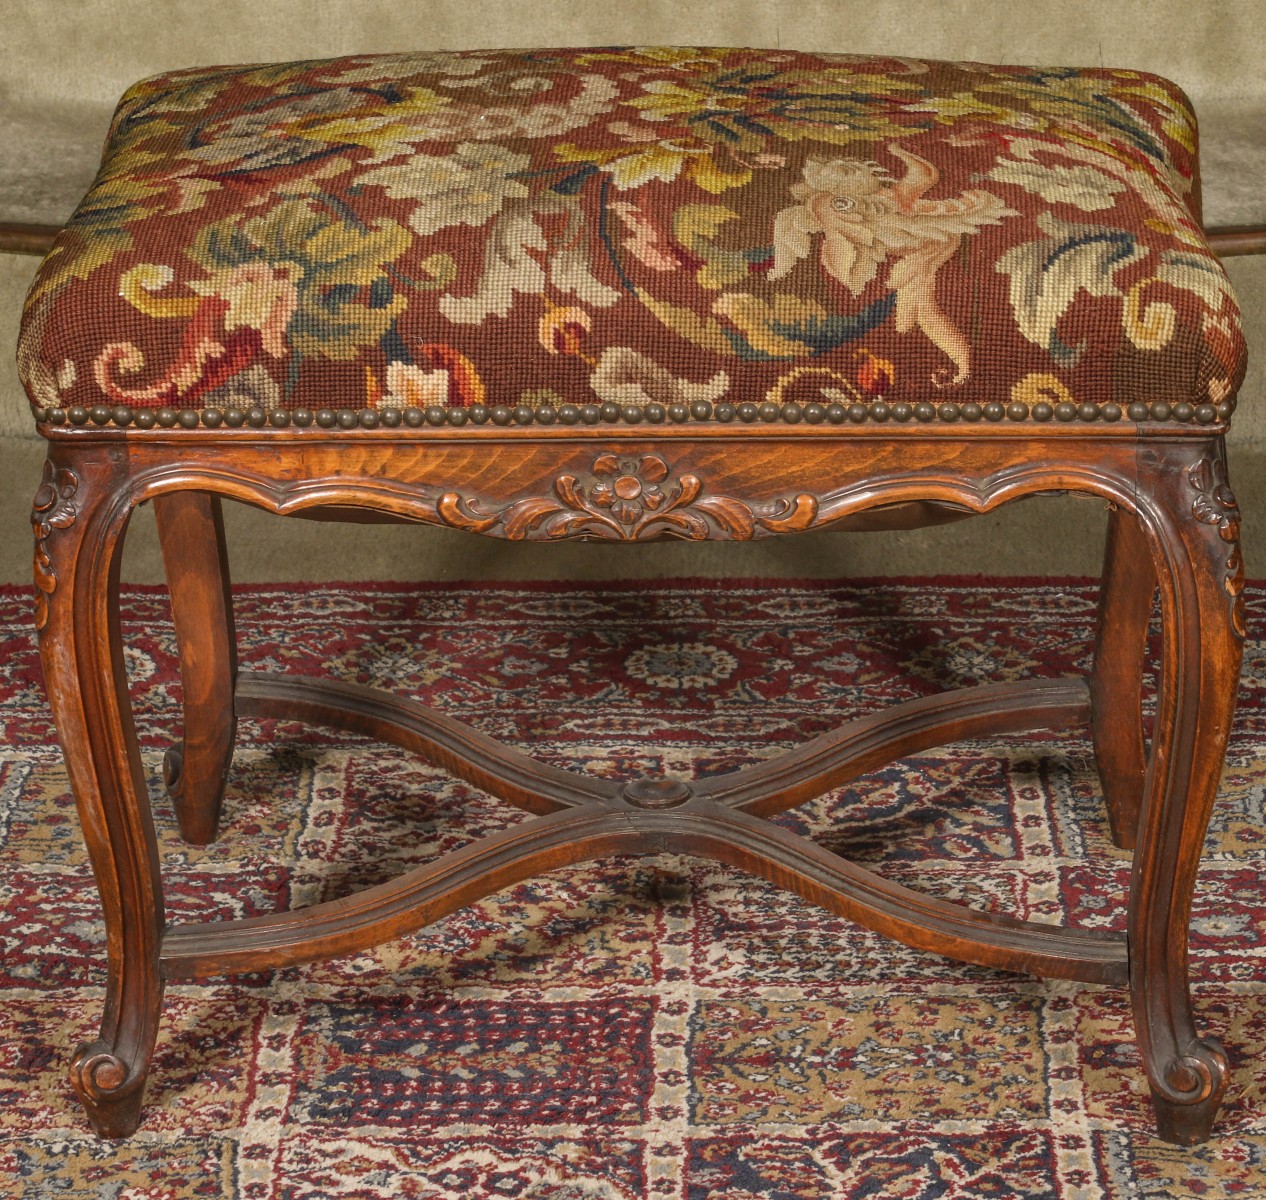 A GOOD 19TH C. LOUIS XV STYLE STOOL WITH NEEDLEPOINT